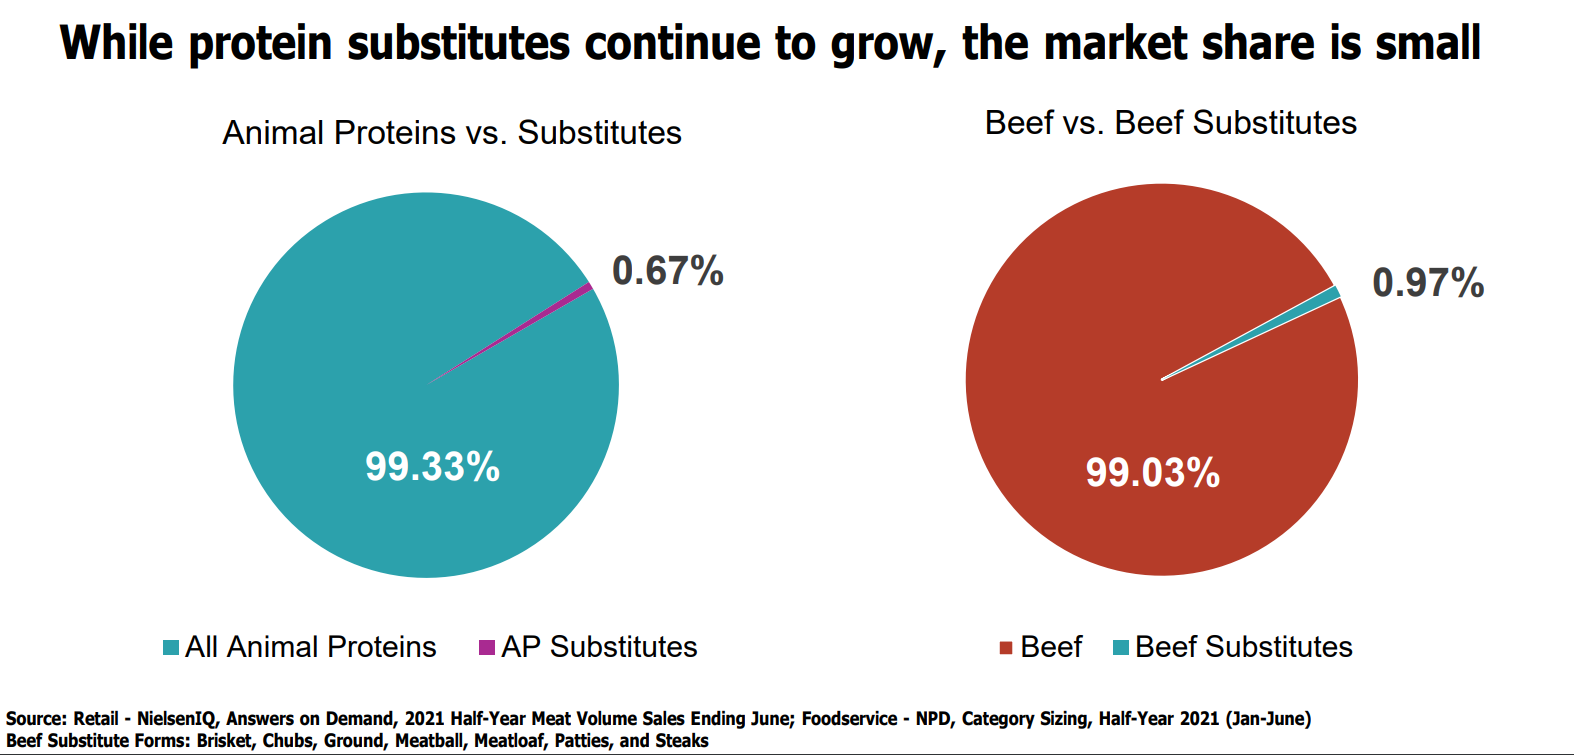 Iowans Choose Beef Over Meat Substitutes